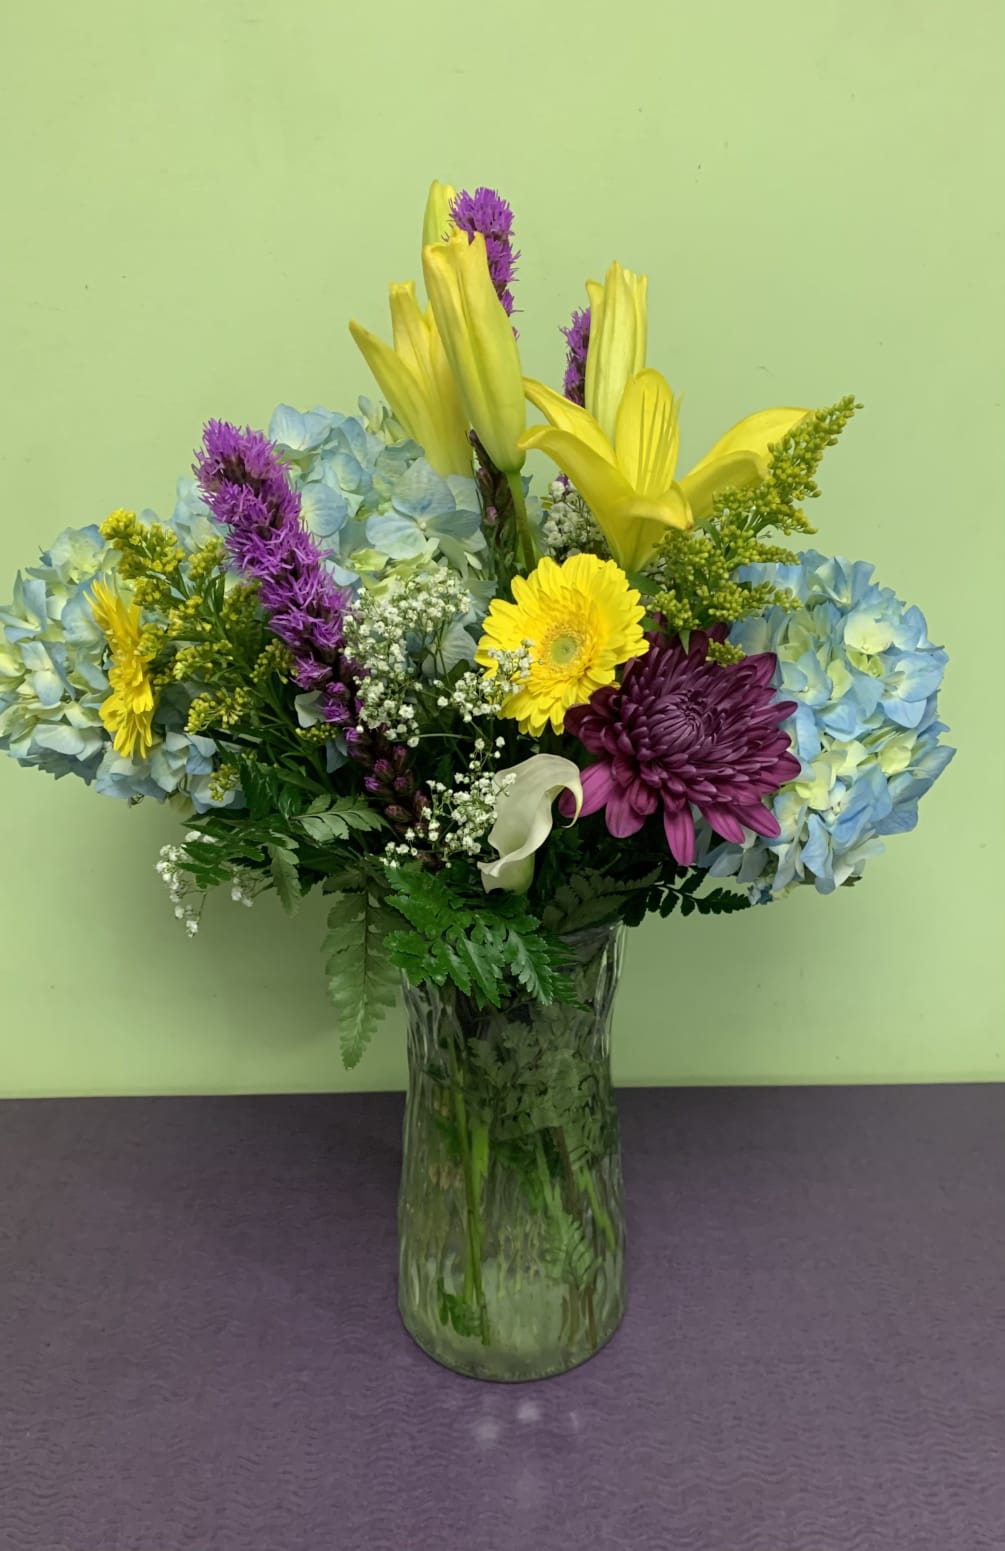 This beautiful arrangement reminds us of a cool breezy day. It has